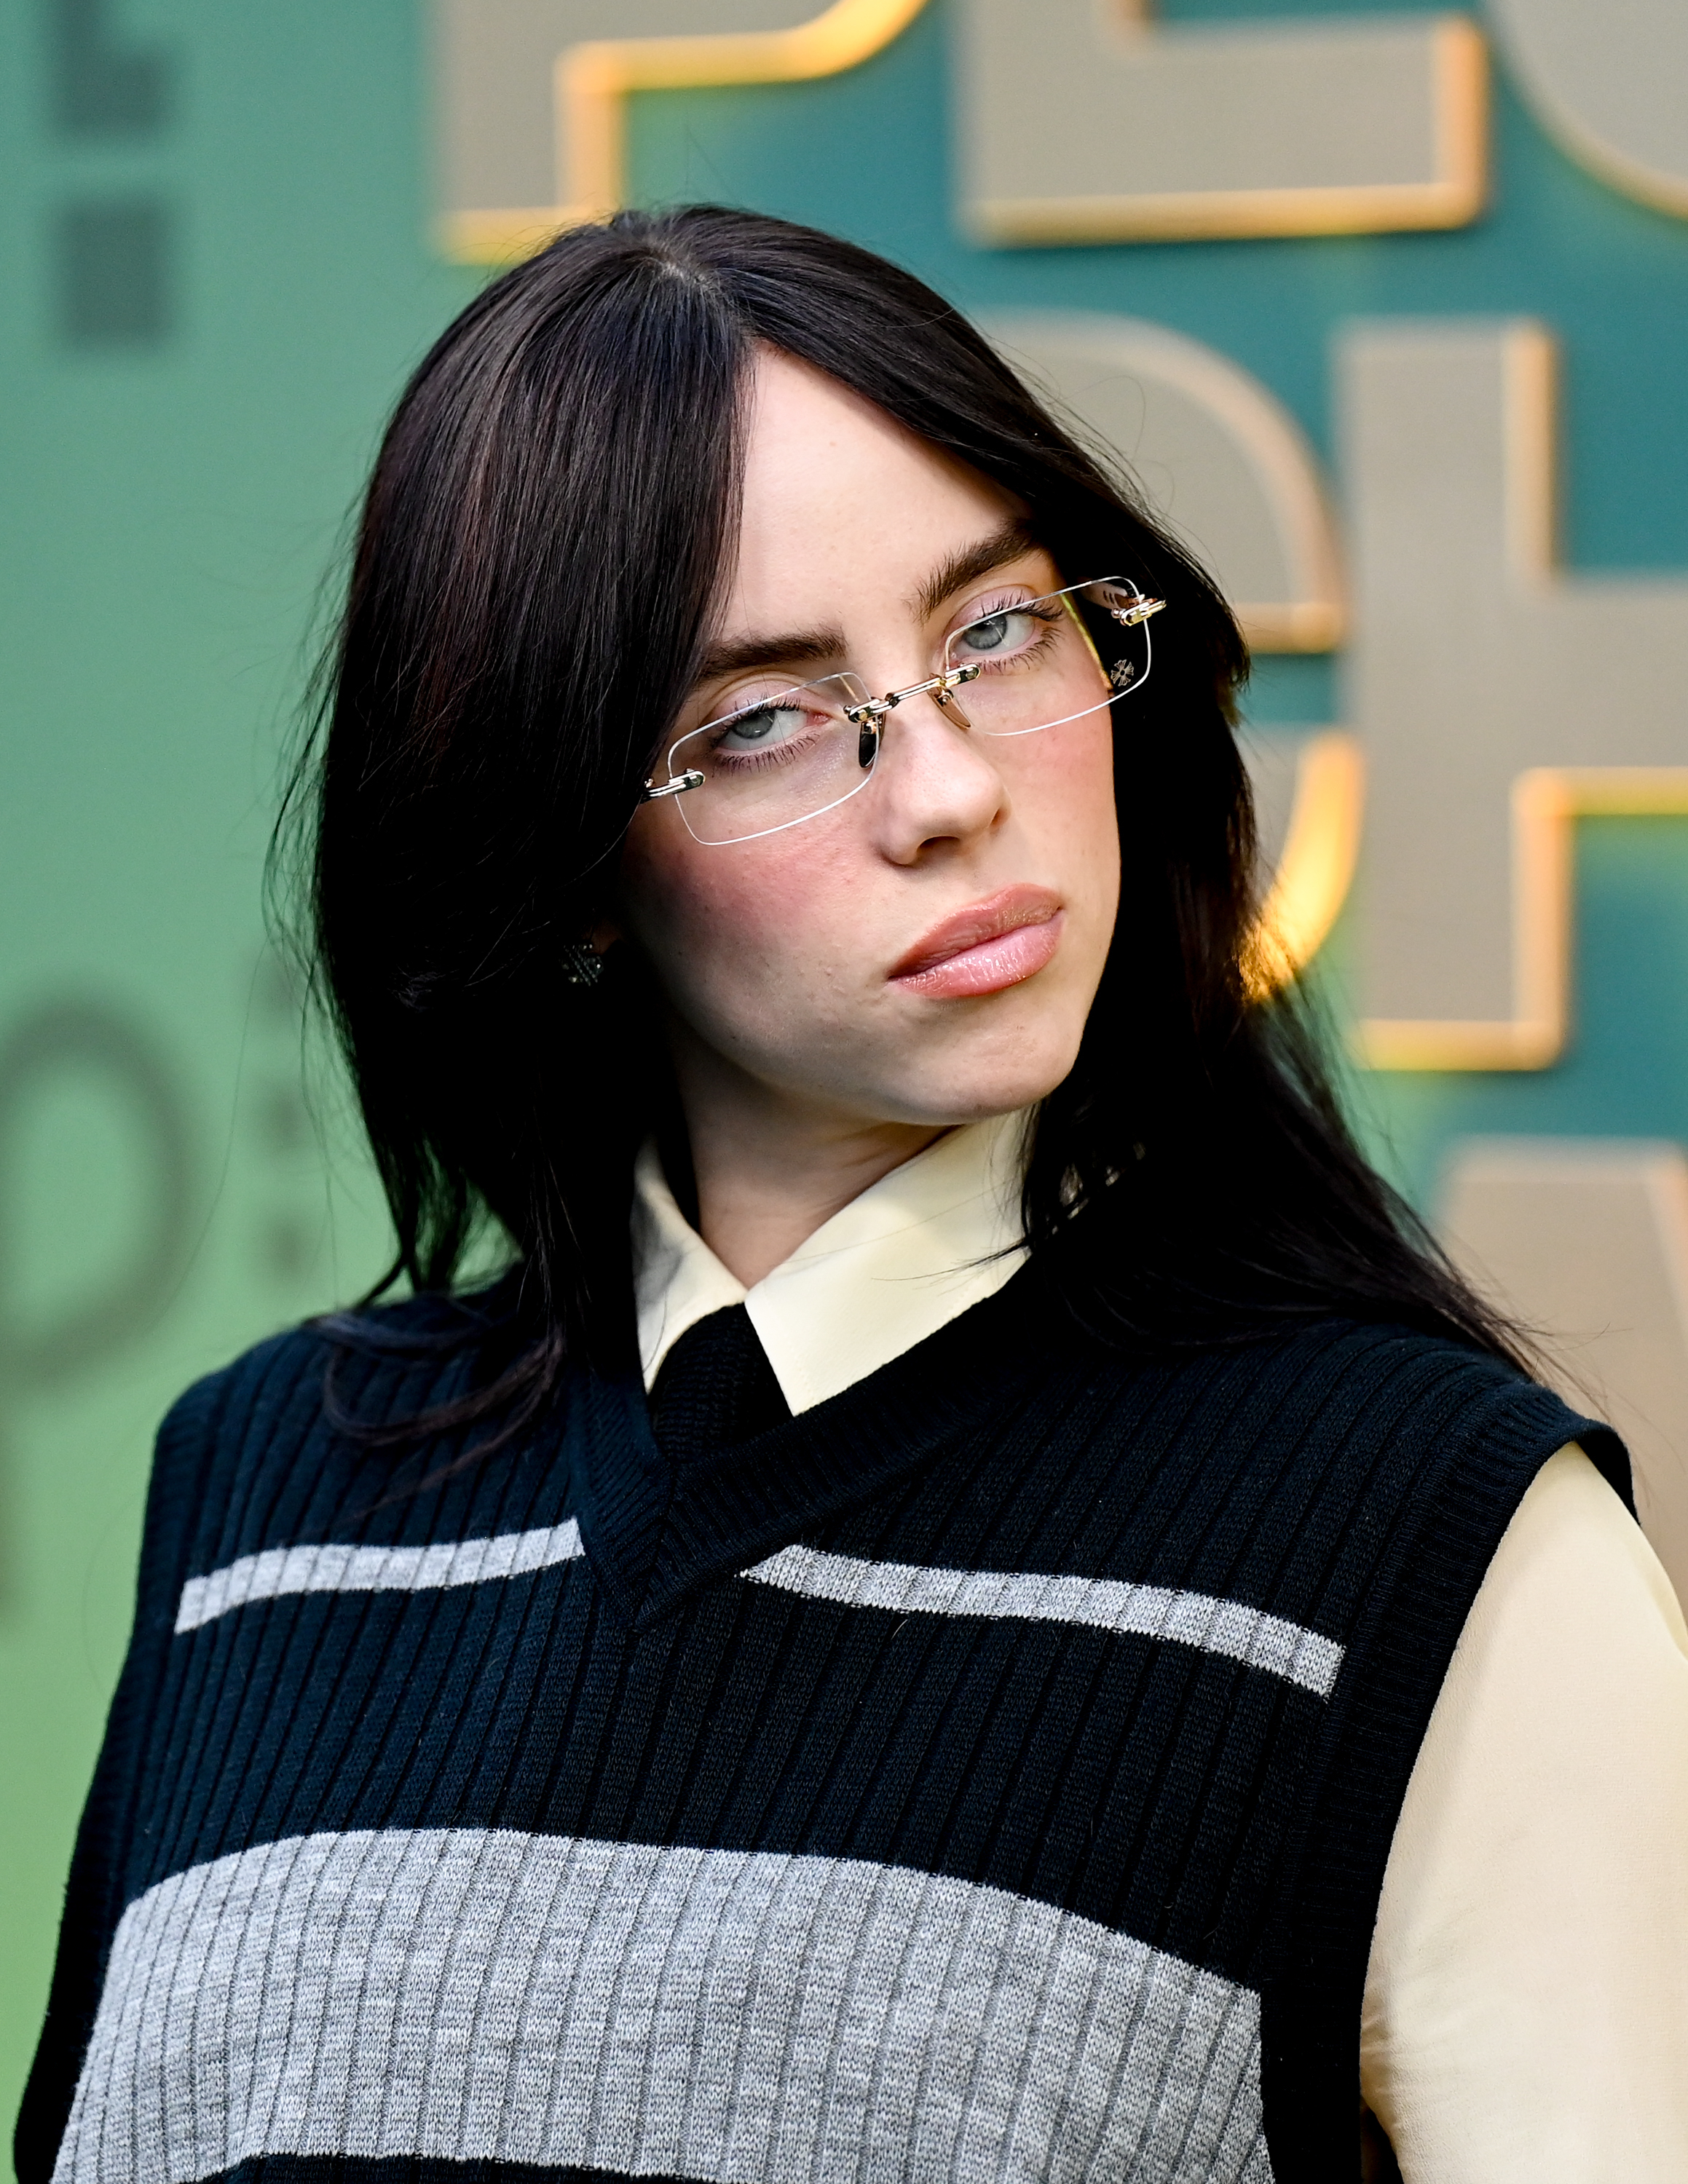 Billie Eilish in a patterned sleeveless top and glasses, posing with a slight pout